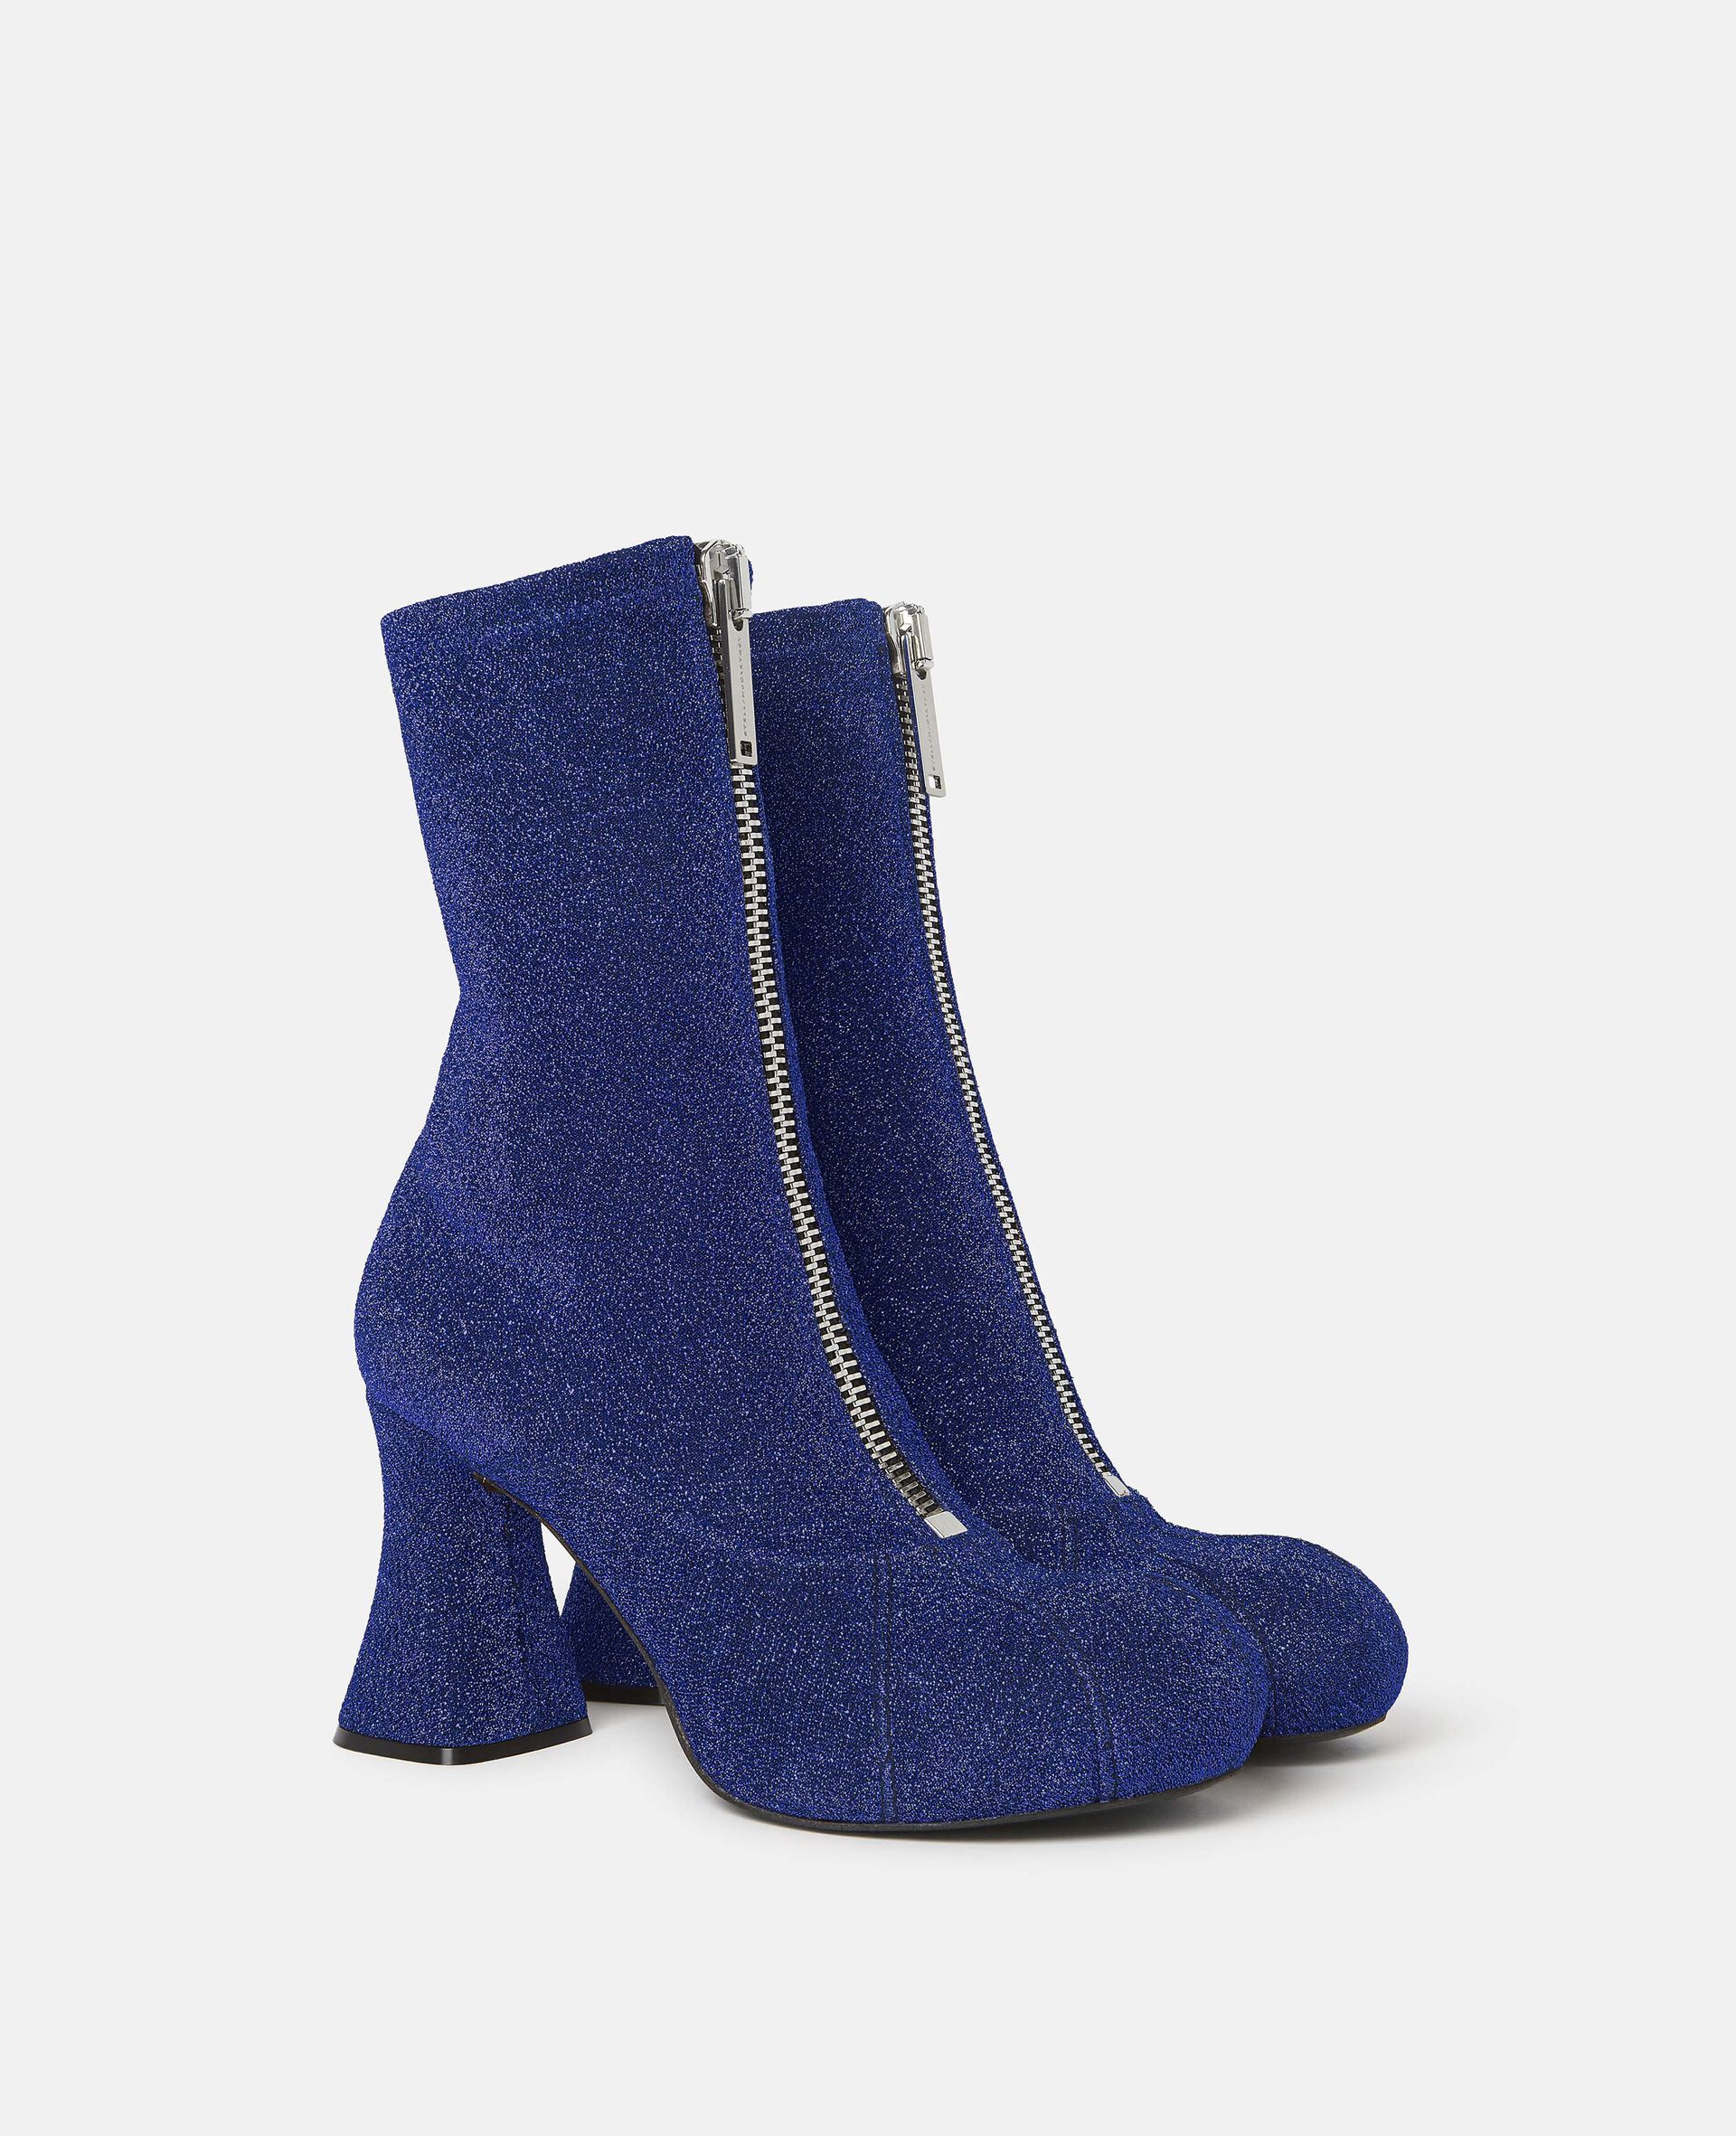 Groove Glitter Ankle Boots -Blue-large image number 0